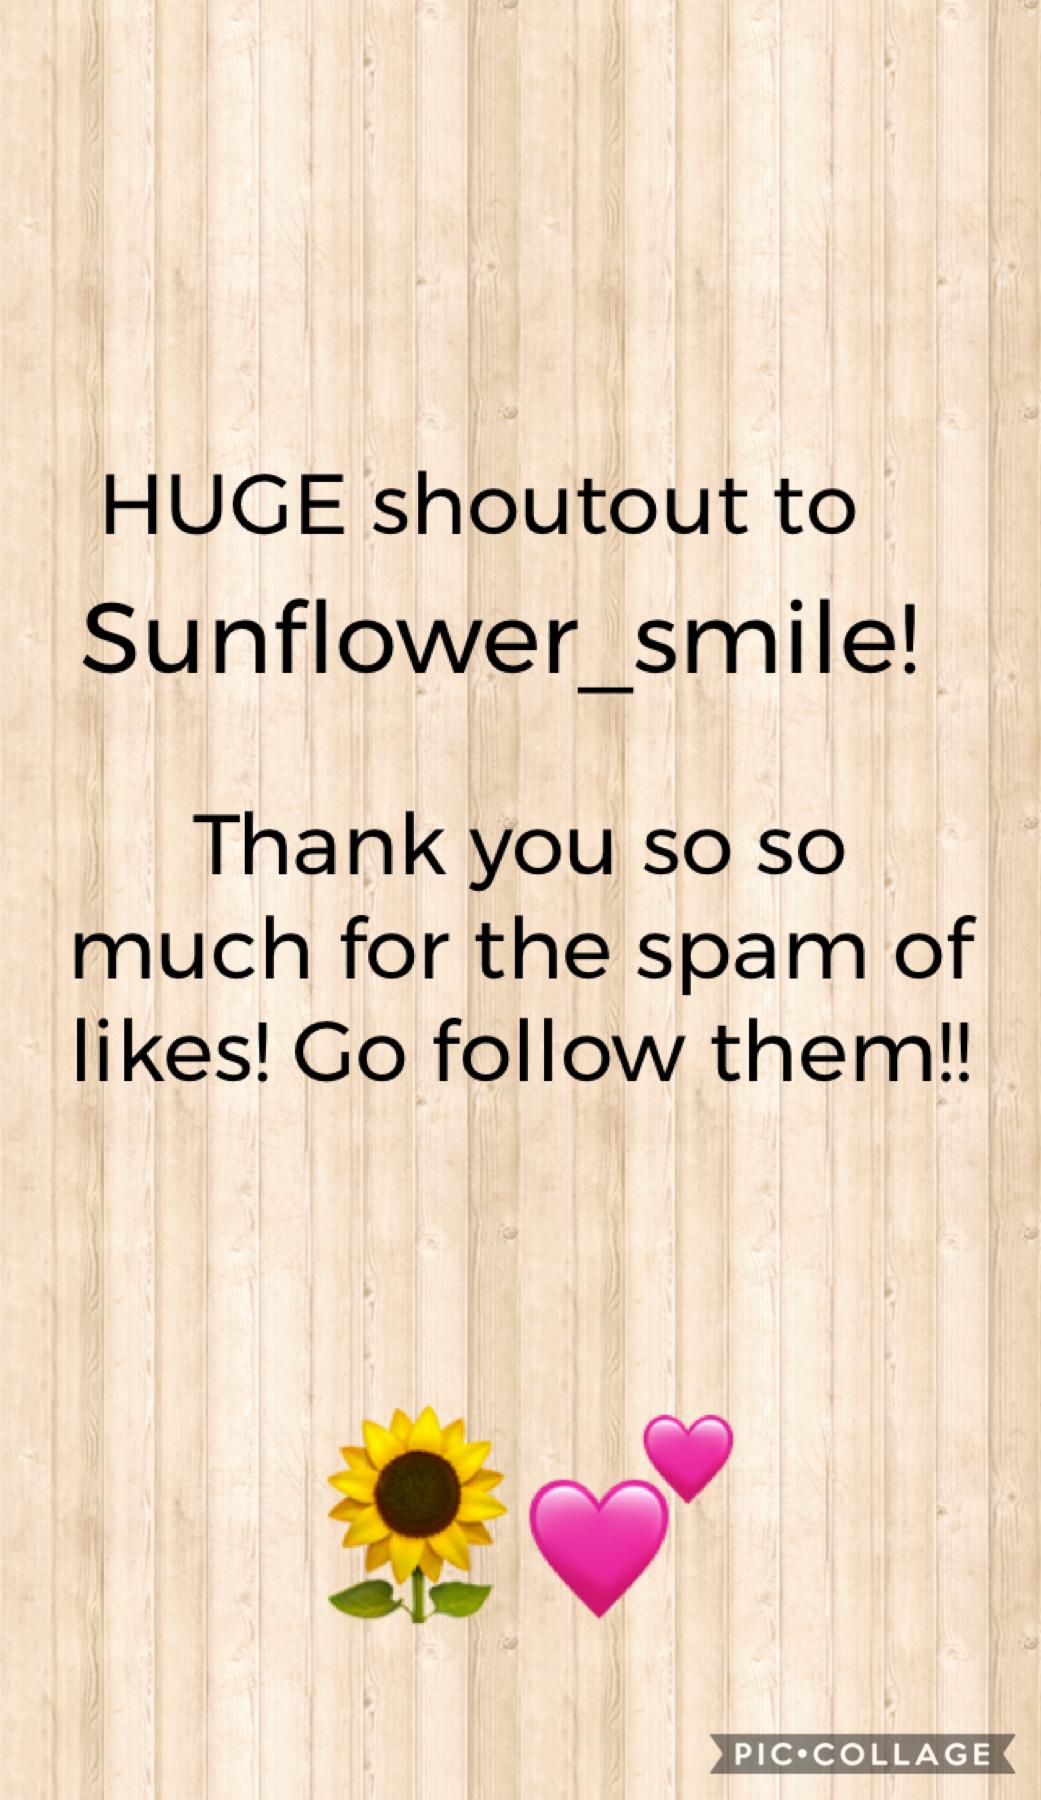 •tapppppp•
Tysm sunflower_smile! You are so kind! 